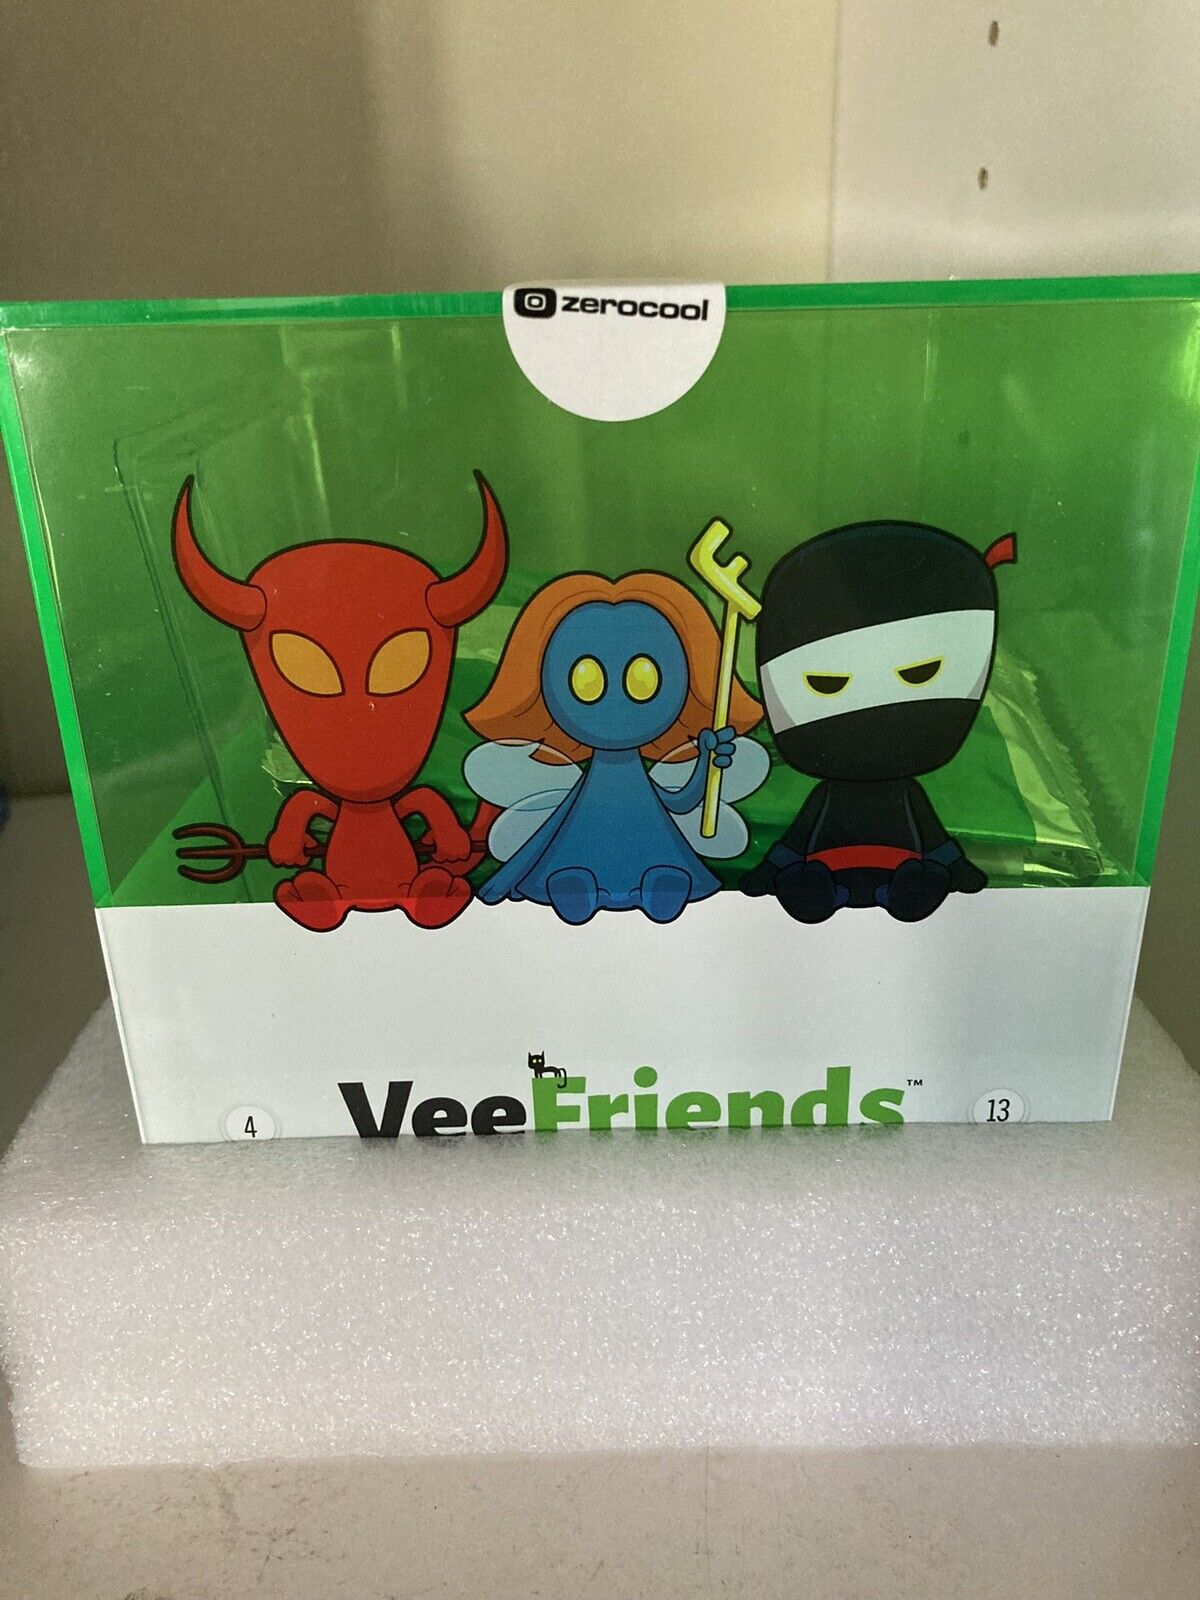 Veefriends Series 2 Compete and Collect GREEN DEBUT EDITION Sealed Box